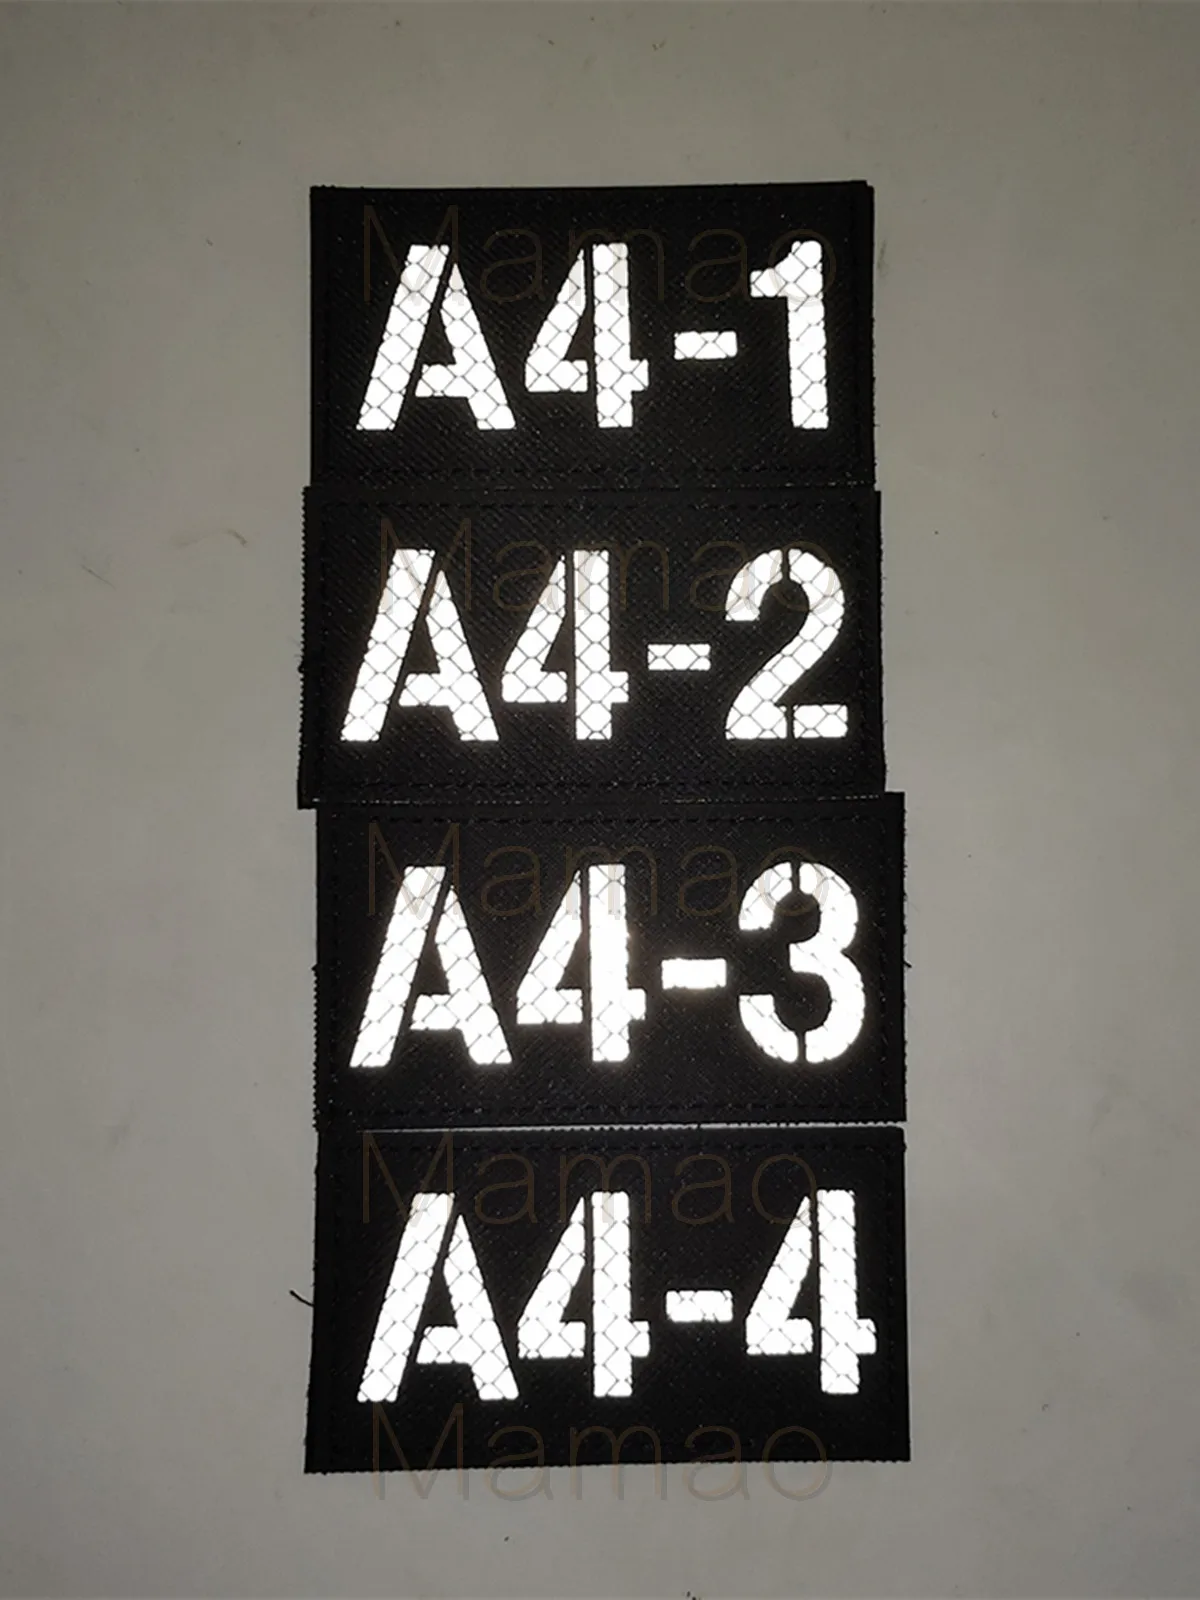 A4-1 Call Sign Letter Infrared Reflective IR Patches Emblem Military Tactical Badges Appliques Hook and Loop Fastener Backing for Backpack Vest Jacket Coat Clothes Accessories